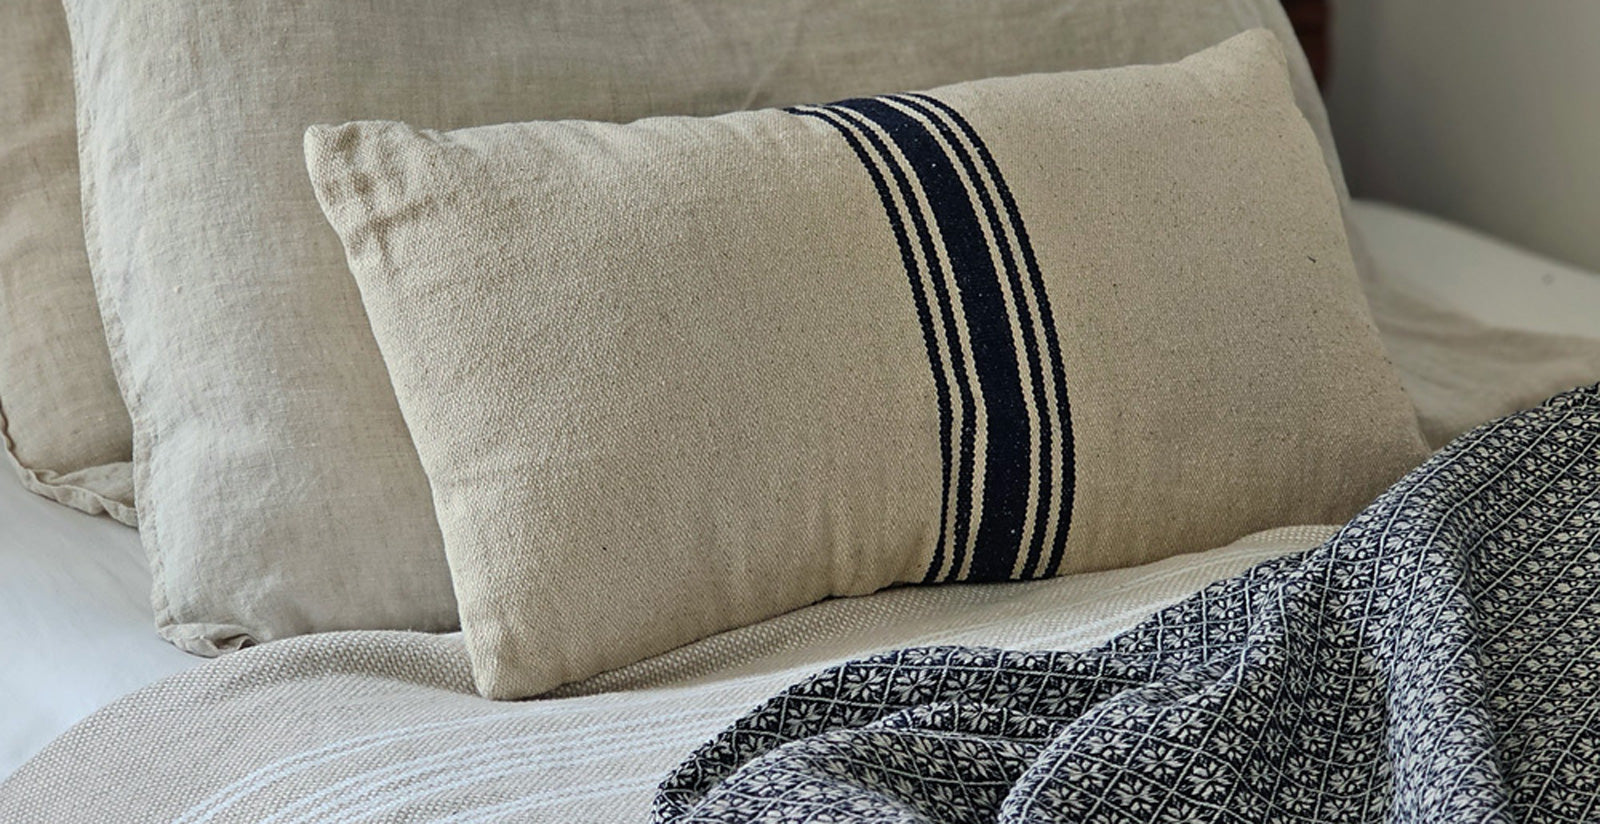 Vintage Truck Accent Pillow in White, Gray, and Navy Blue